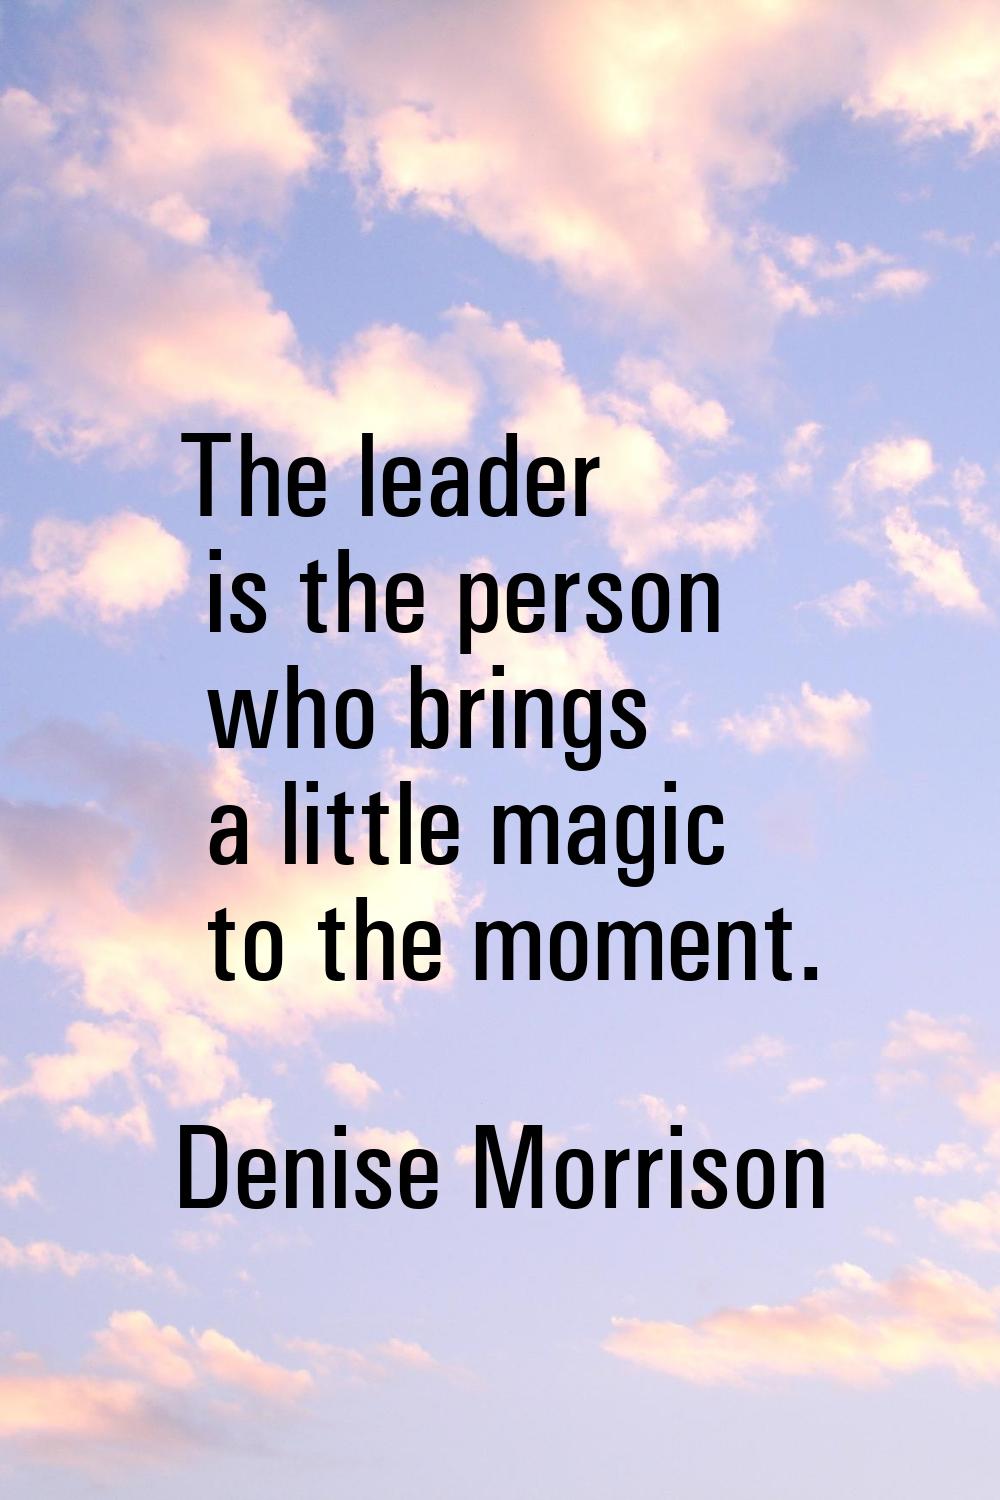 The leader is the person who brings a little magic to the moment.